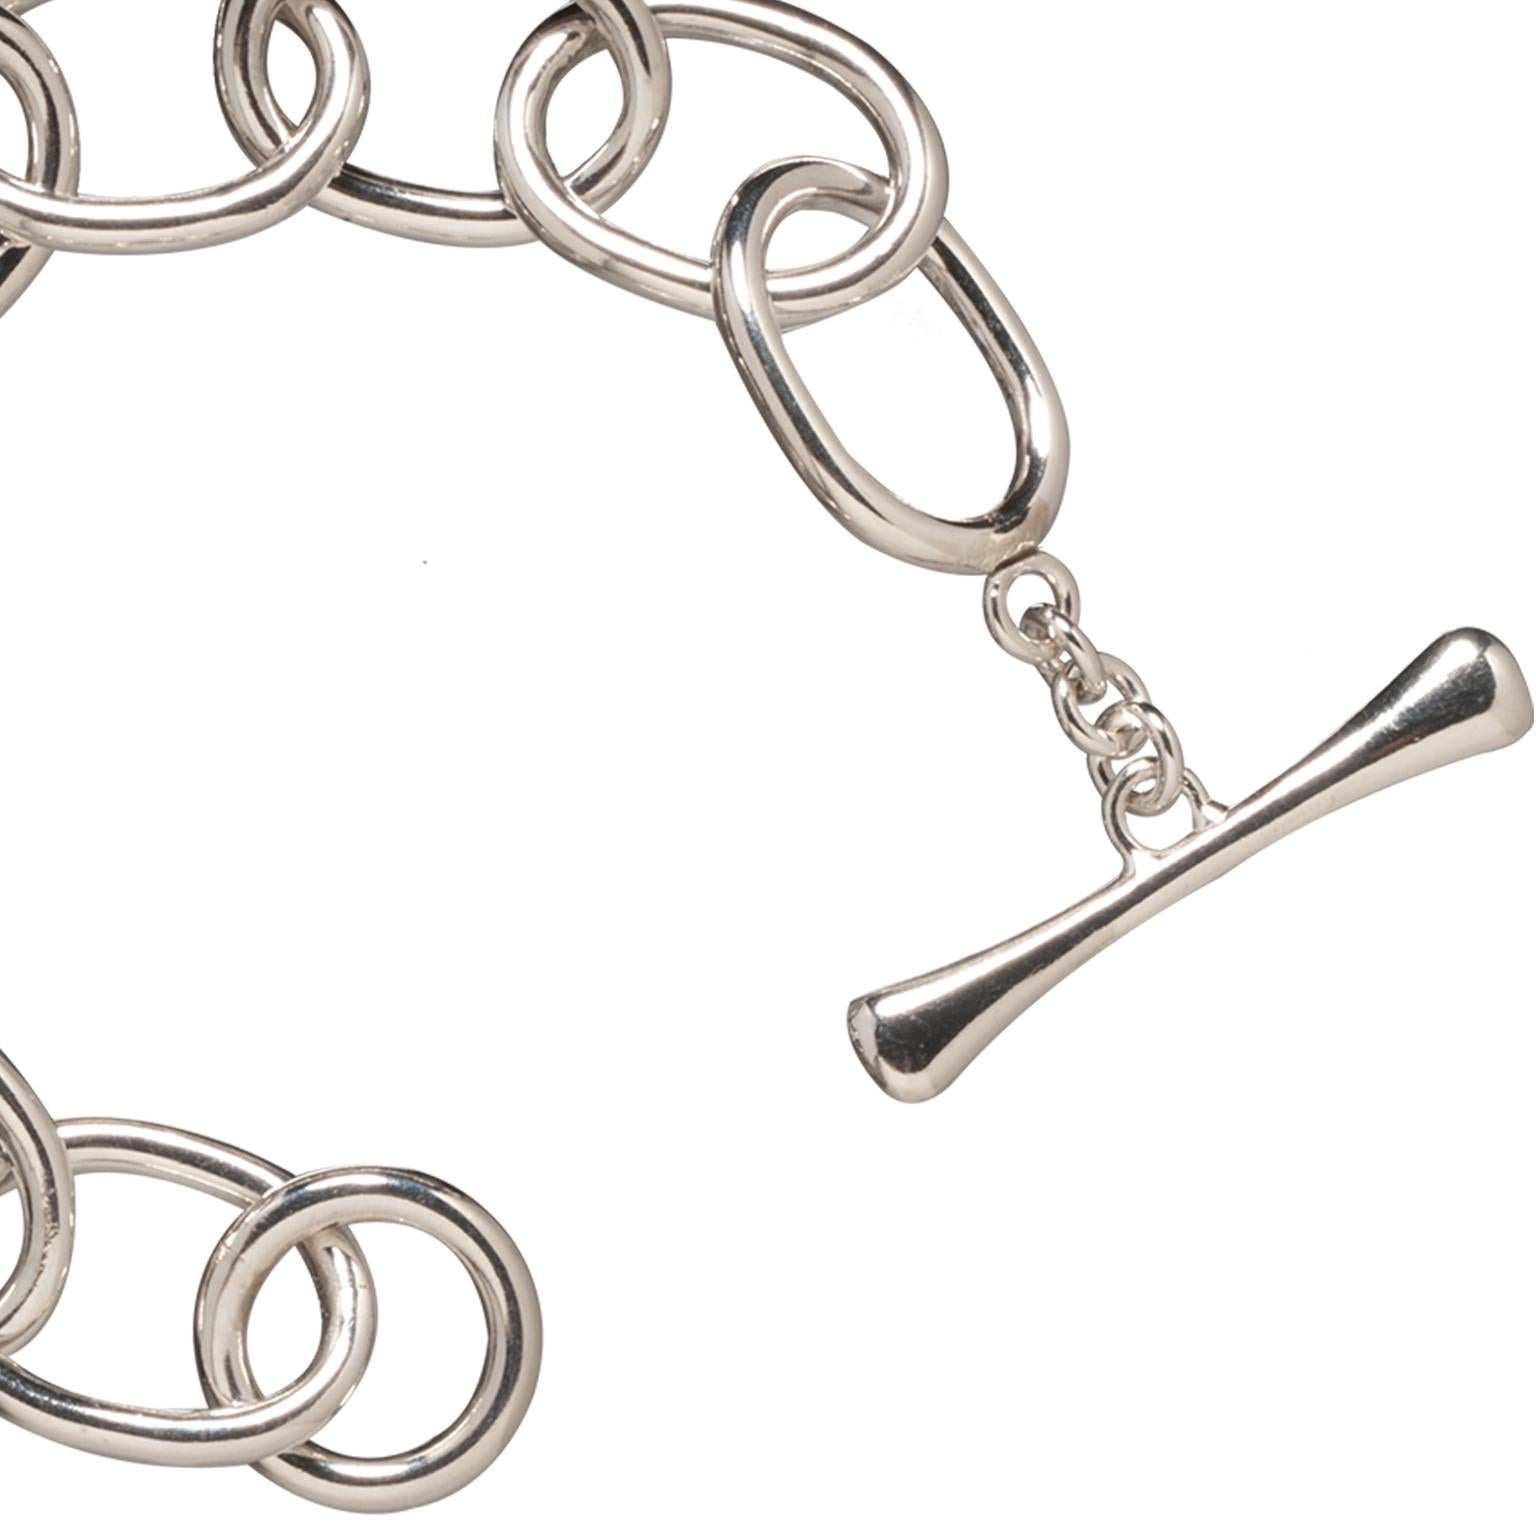 A twist on the classic chain link bracelet, Faye Kim's oval link bracelet is a statement piece with impact!  Extra-large oval links are handmade with thick sterling silver wire to give the bracelet substance.  The over-sized toggle is the perfect